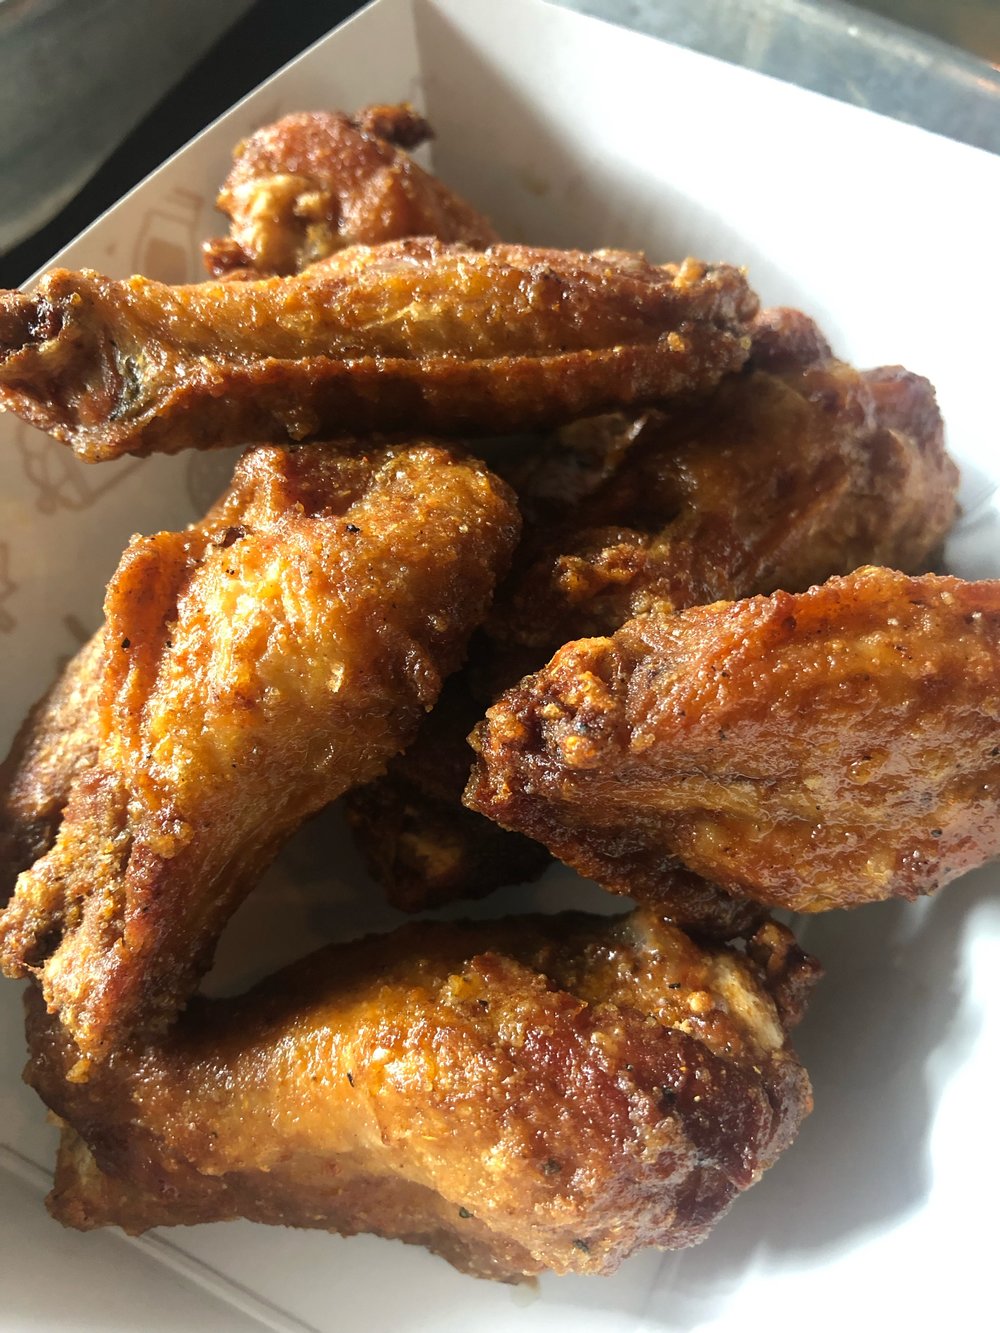 Dirty (dry rub) wings from The Dirty Bird